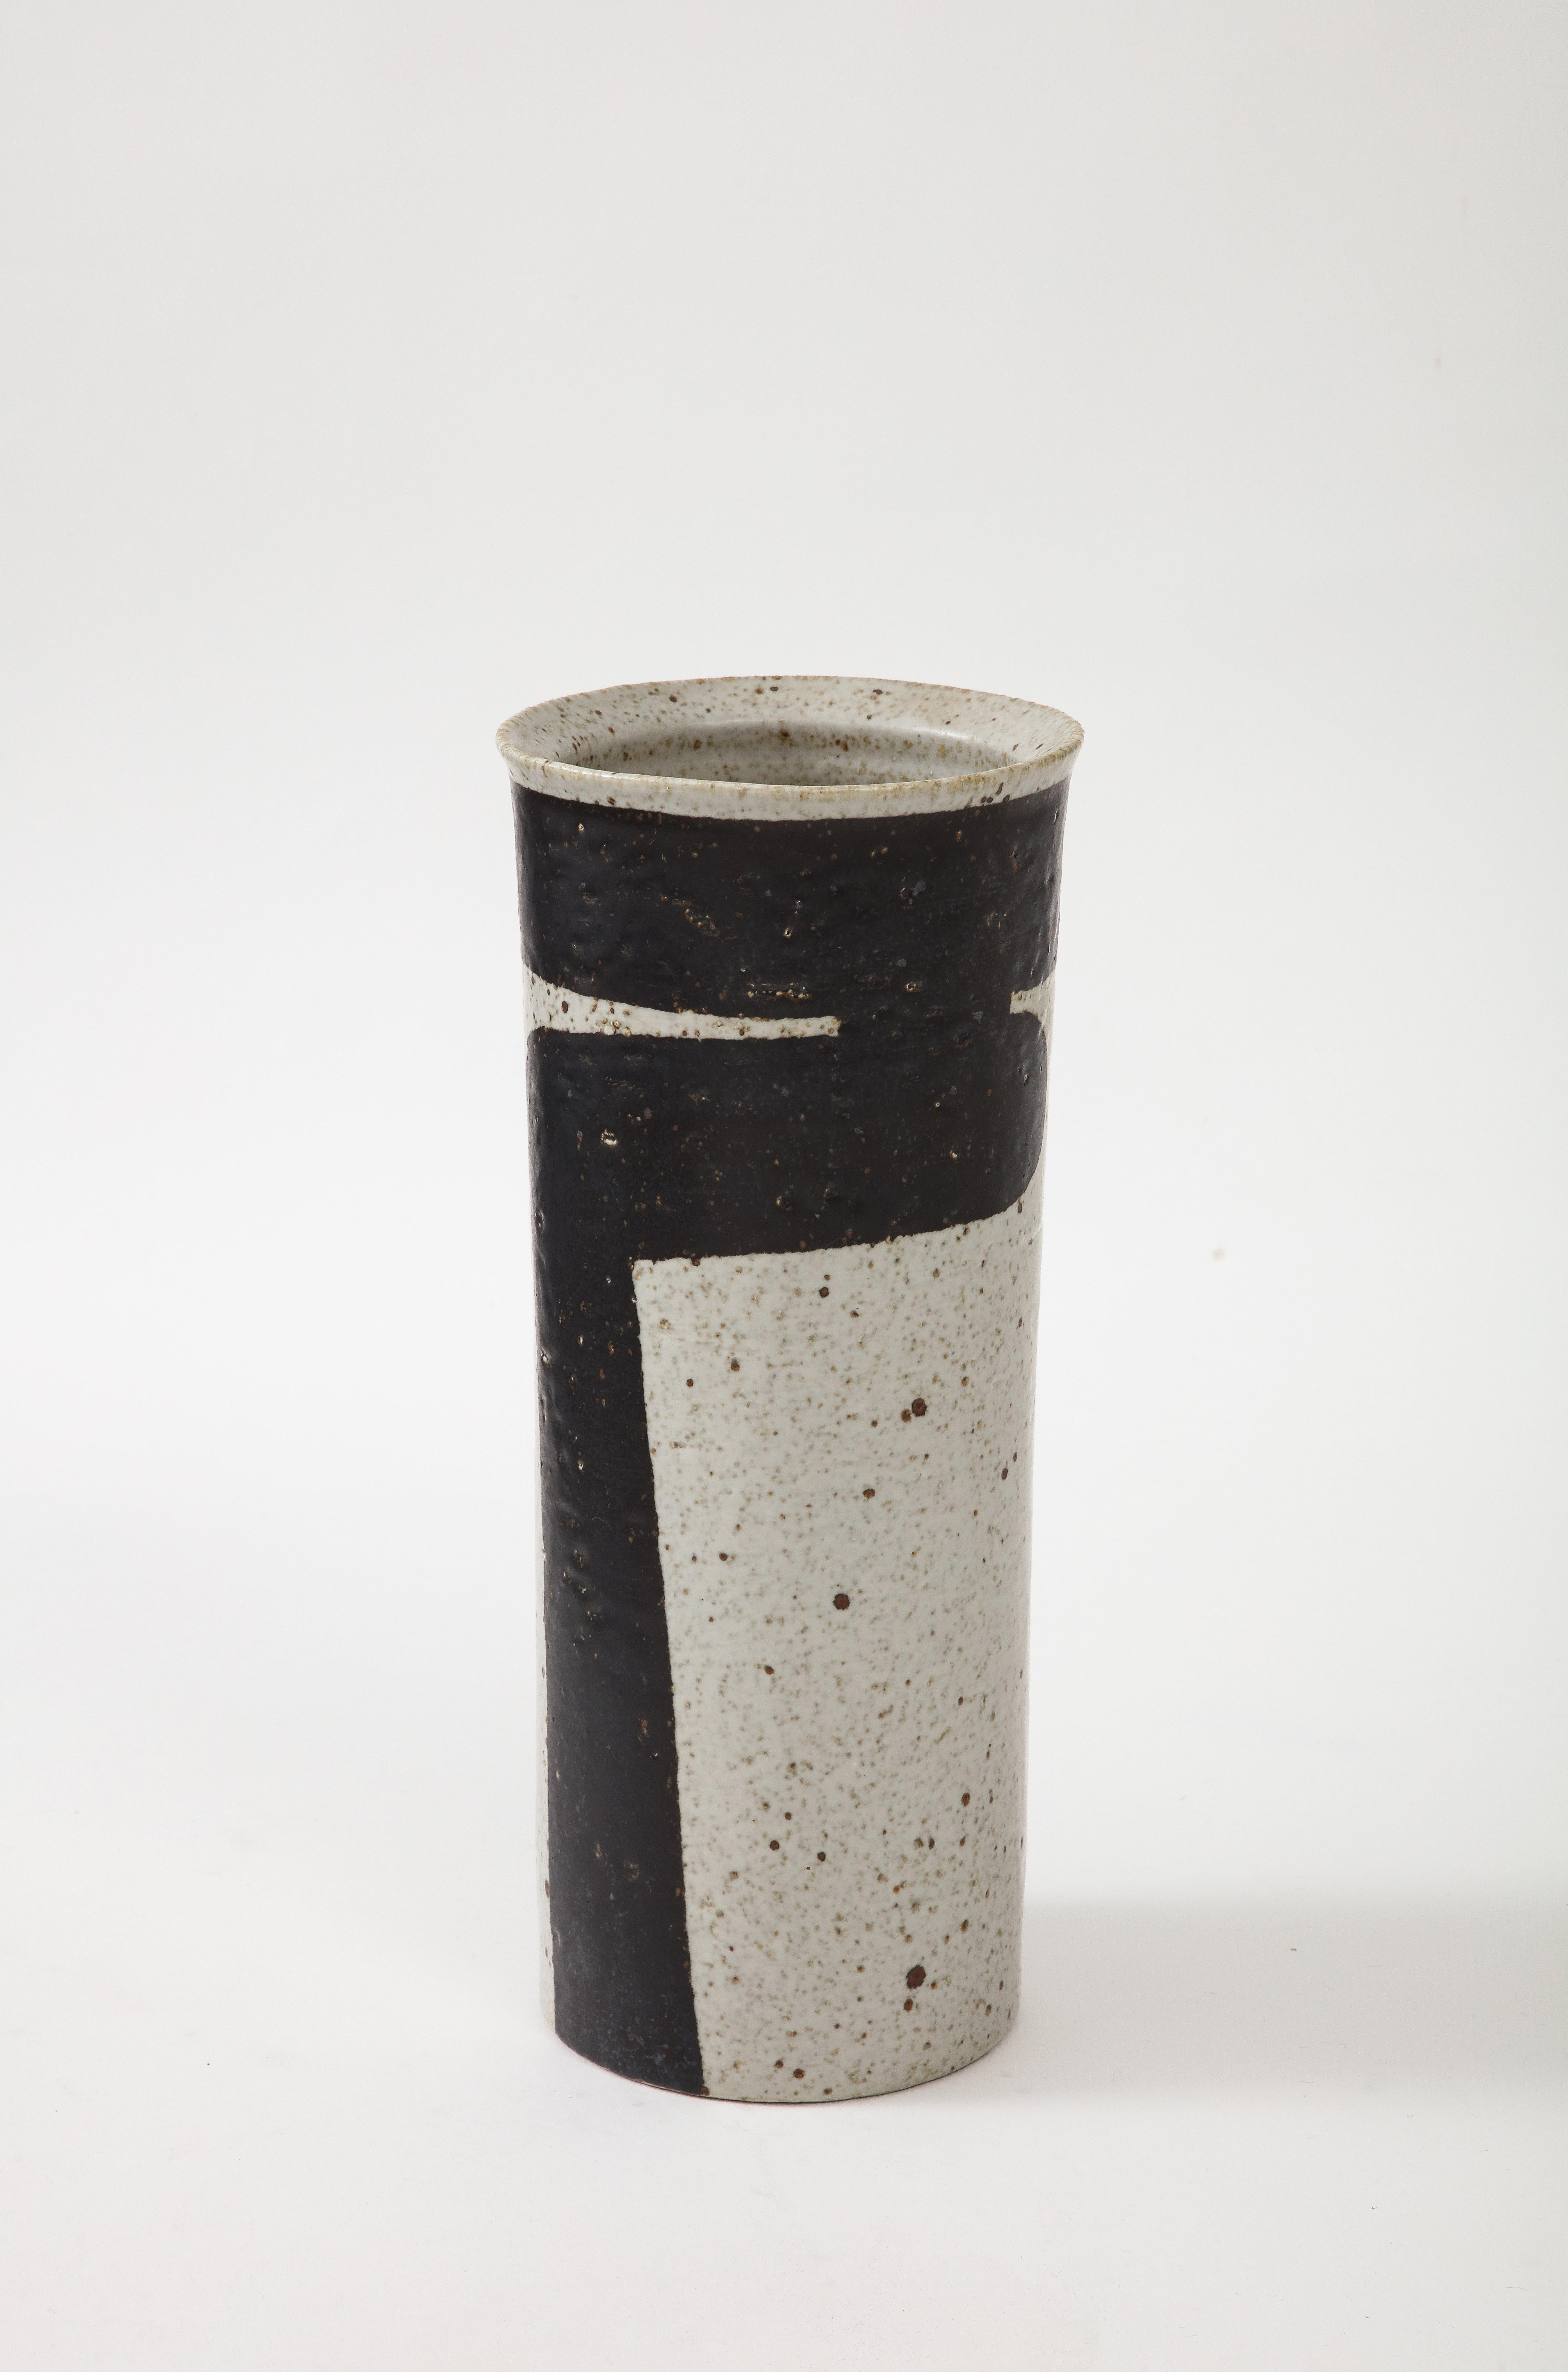 Inger Persson, b. 1936, signed: 'IP ATELJÉ SWEDEN’
Rörstrand, Sweden, c. 1960’s
H: 12 D: 5: W: 5 in. Slight Oval.

This Tall version of the vase is uncommon.